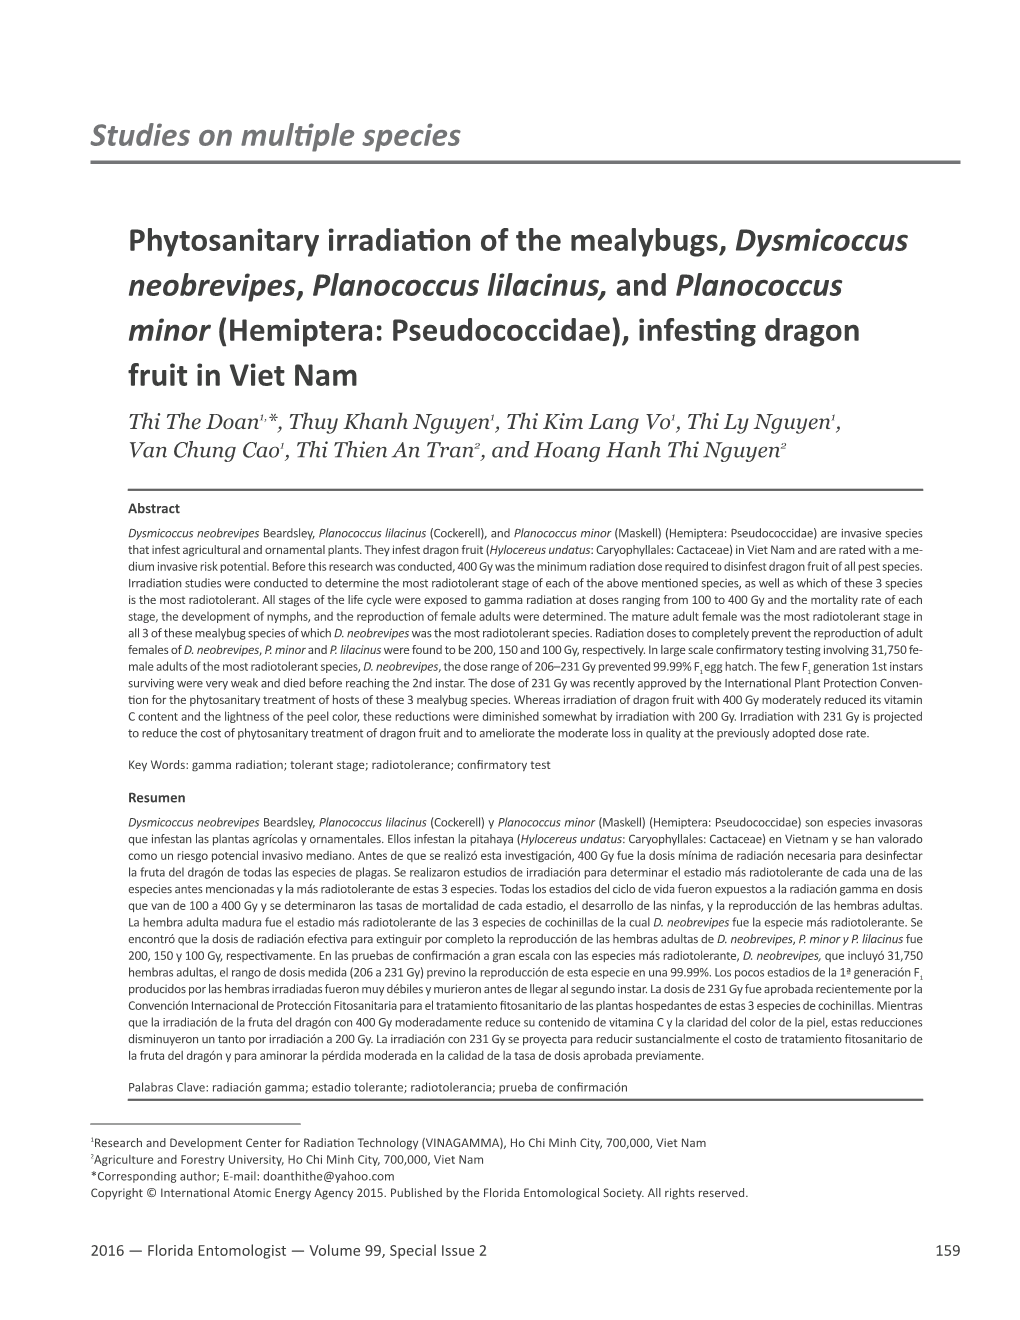 Studies on Multiple Species Phytosanitary Irradiation of the Mealybugs, Dysmicoccus Neobrevipes, Planococcus Lilacinus, and Plan